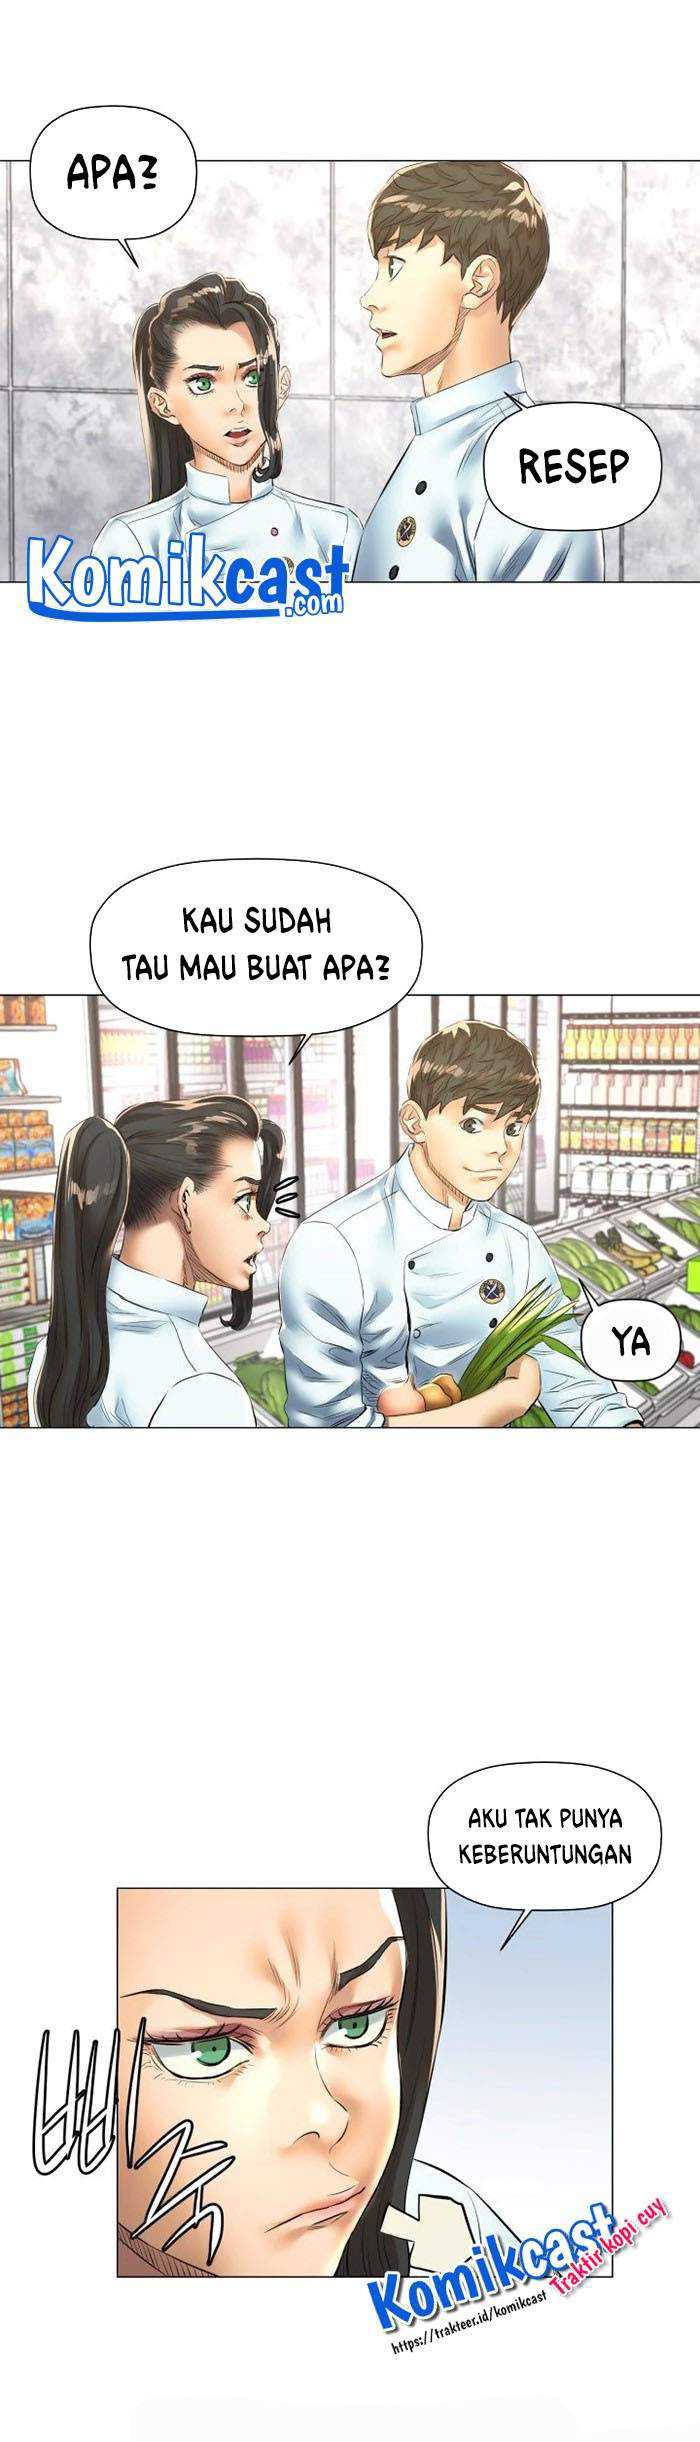 God of Cooking Chapter 38